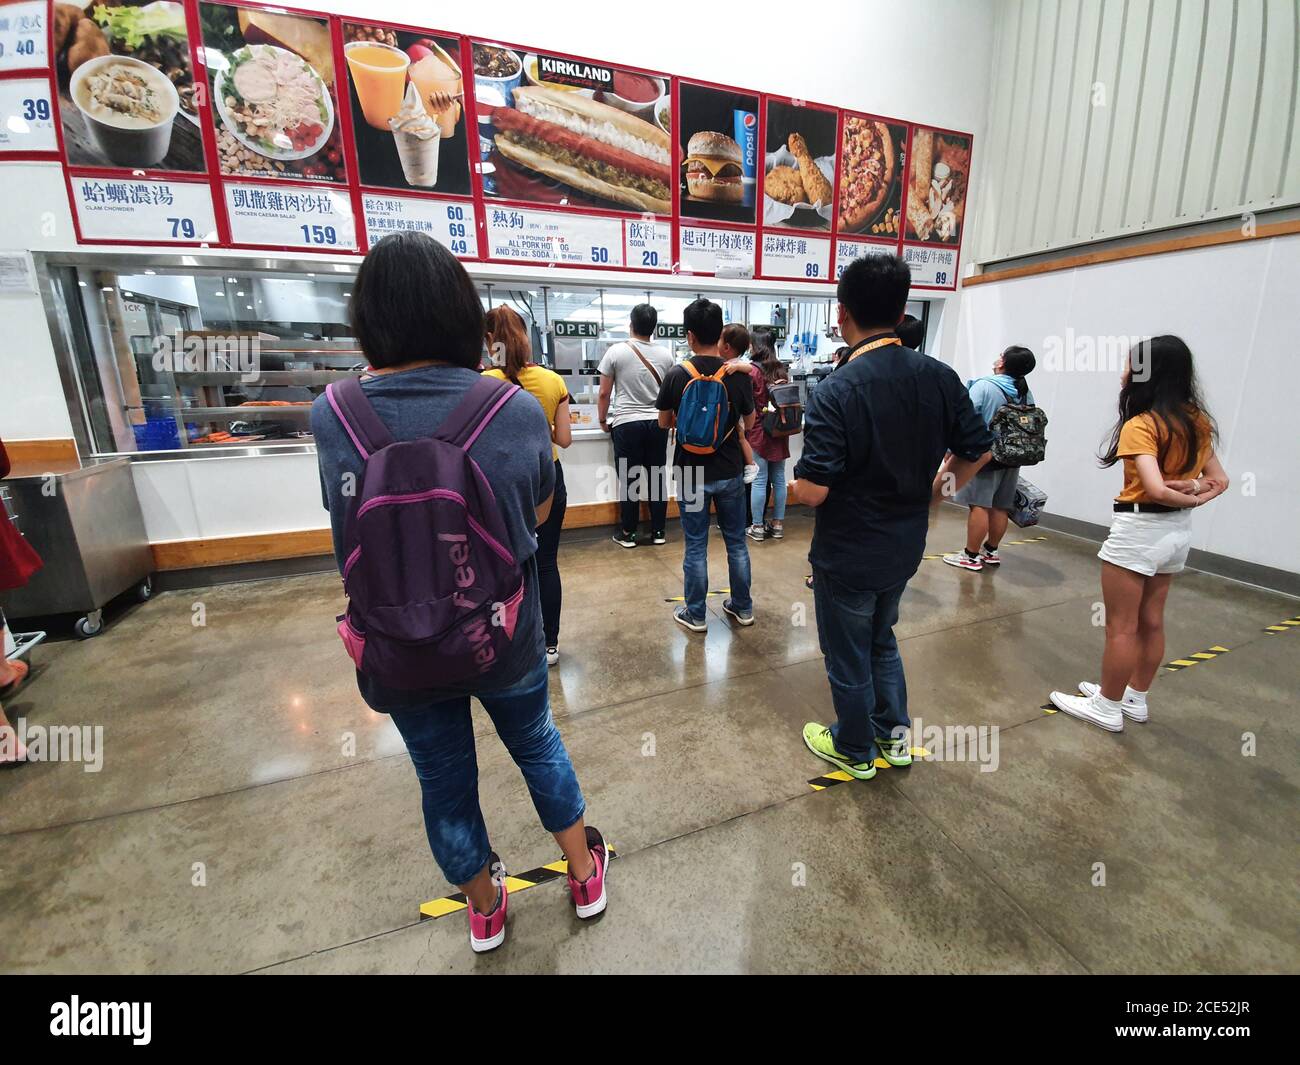 Hsinchu / Taiwan - August 28, 2020: Asian customers queuing keeping safe social distance at Costco supermarket restaurant Stock Photo